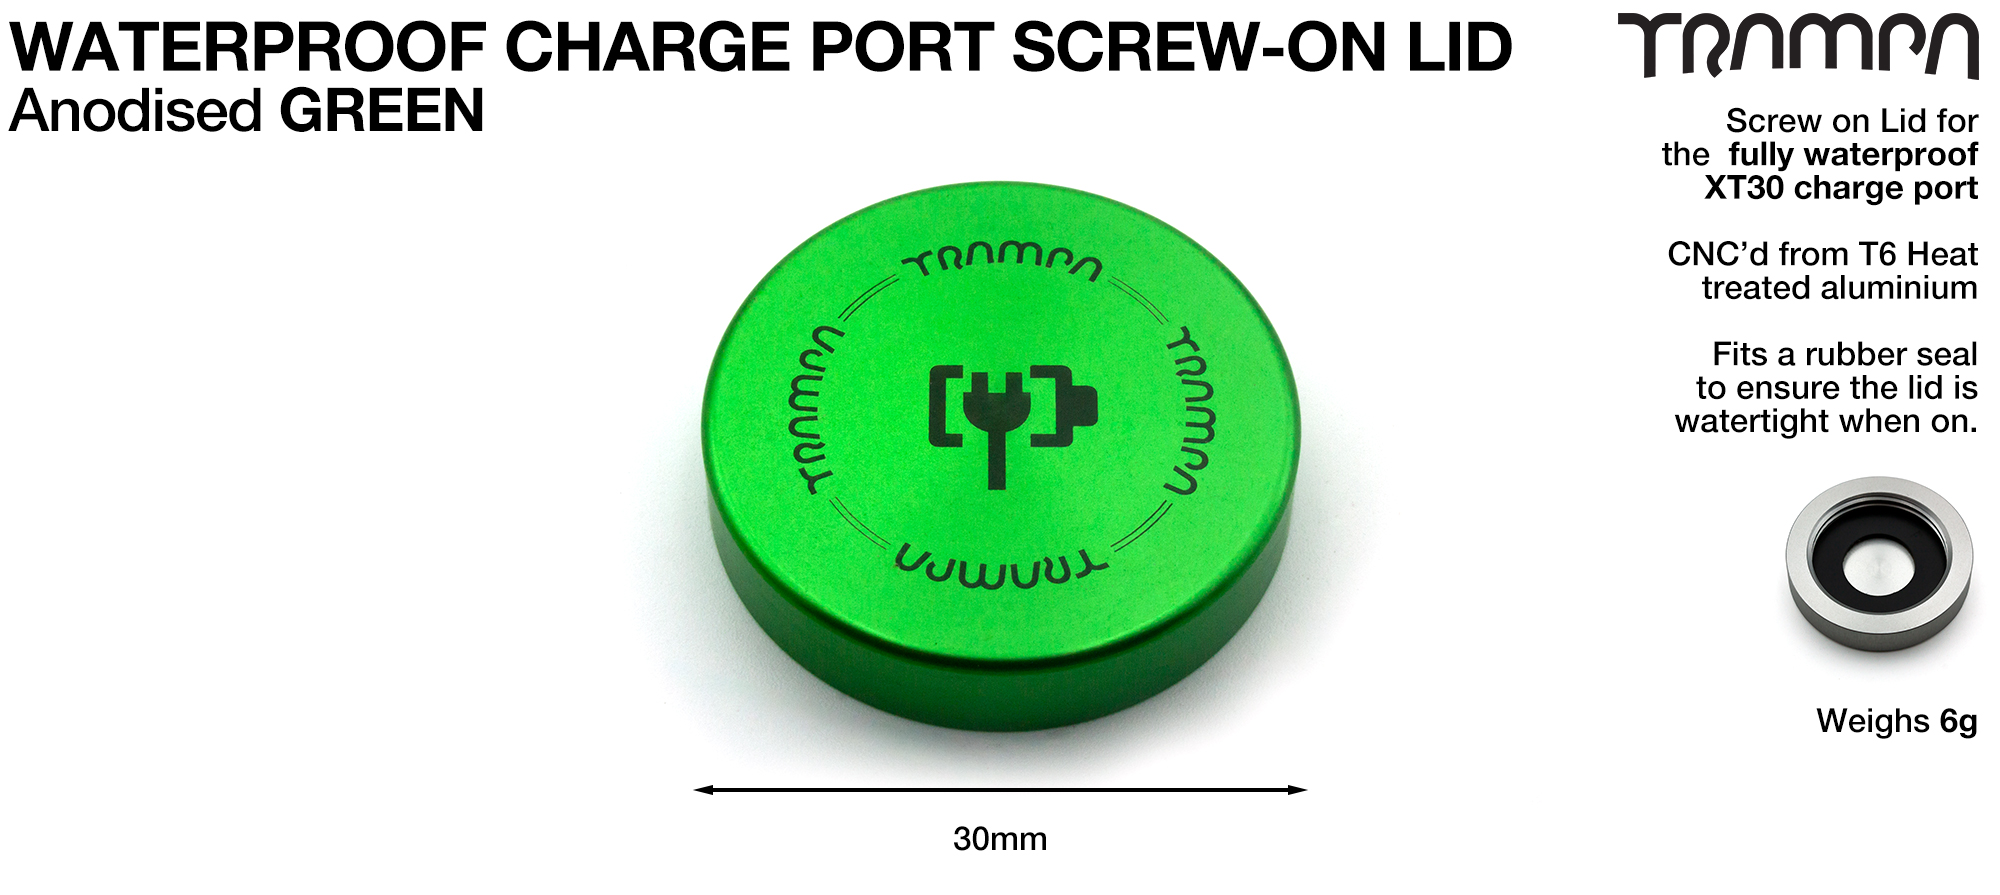 14FIFTIES Charge Point TOP - Anodised GREEN